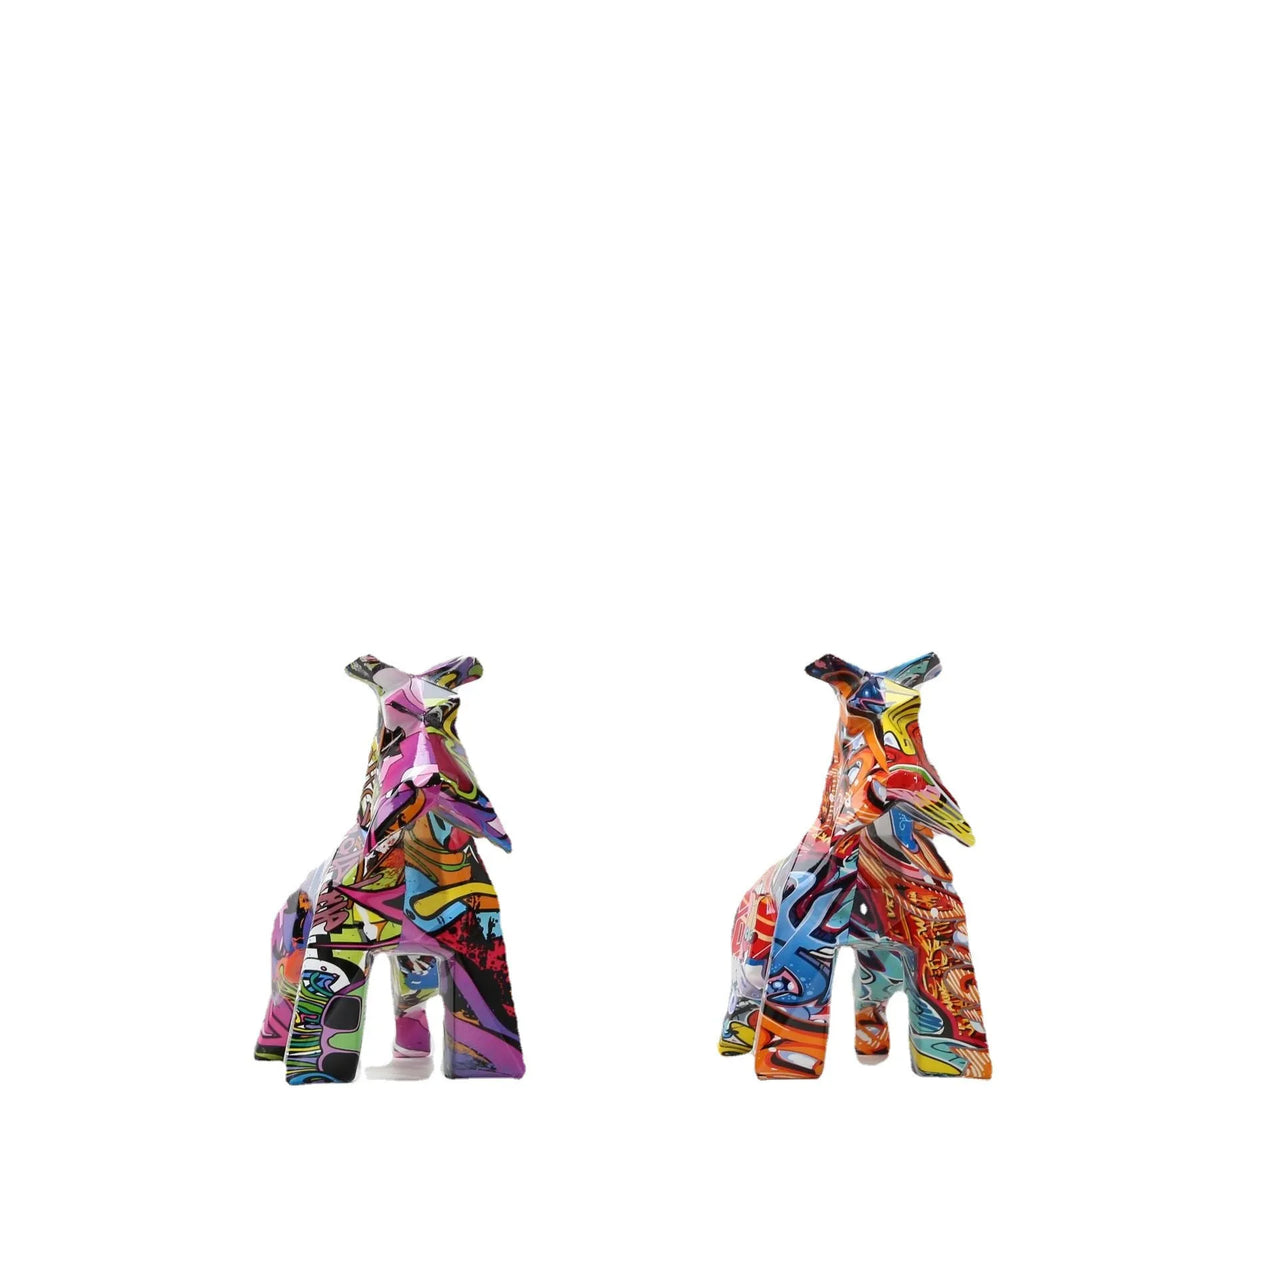 Modern Graffiti Schnauzer Painting Resin Crafts Sculptures and Statues Gift